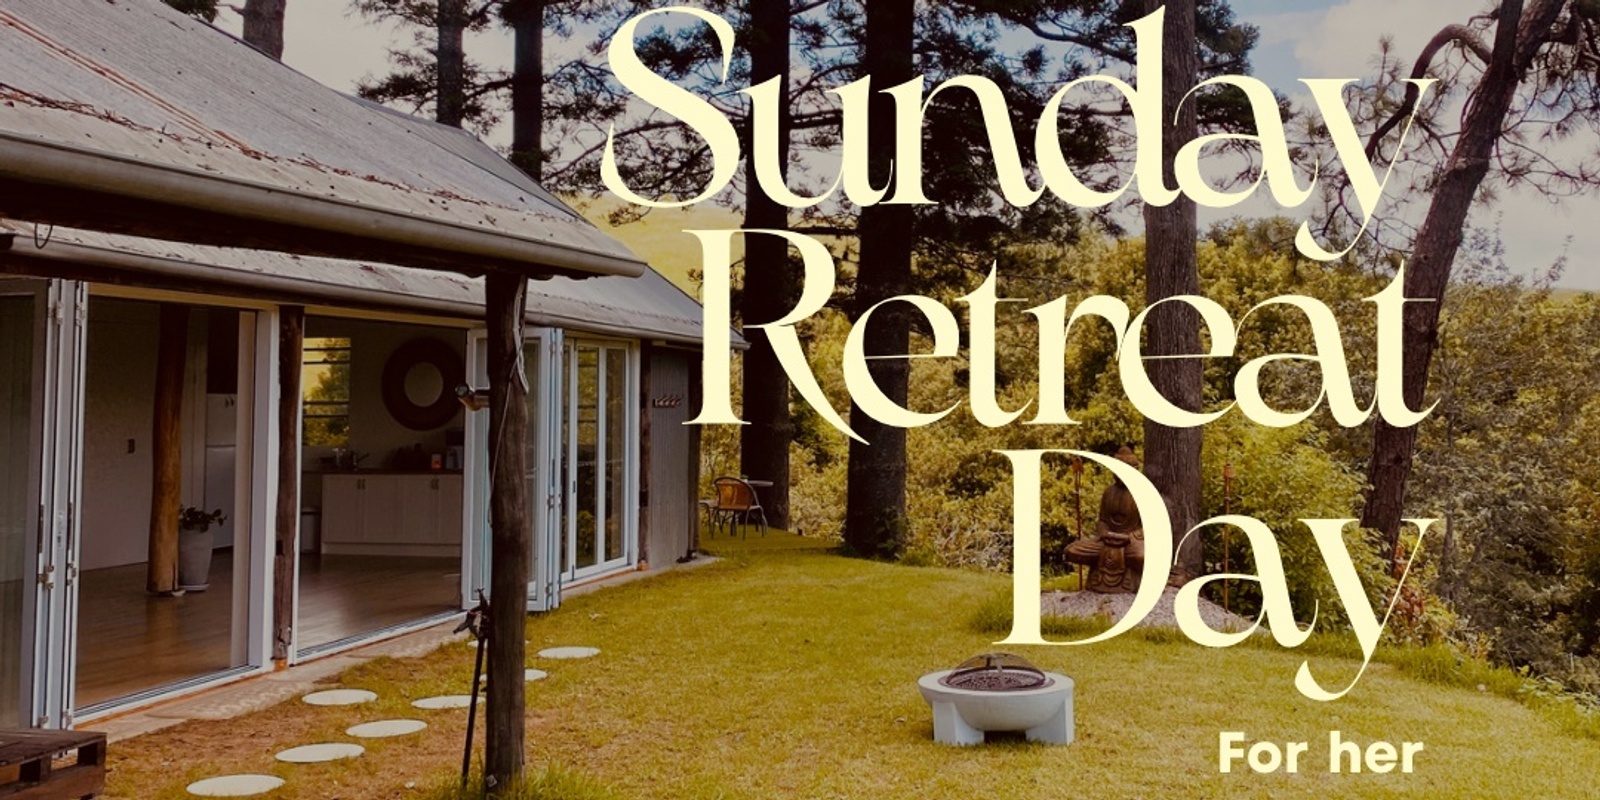 Banner image for Soulful Sunday Retreat Day